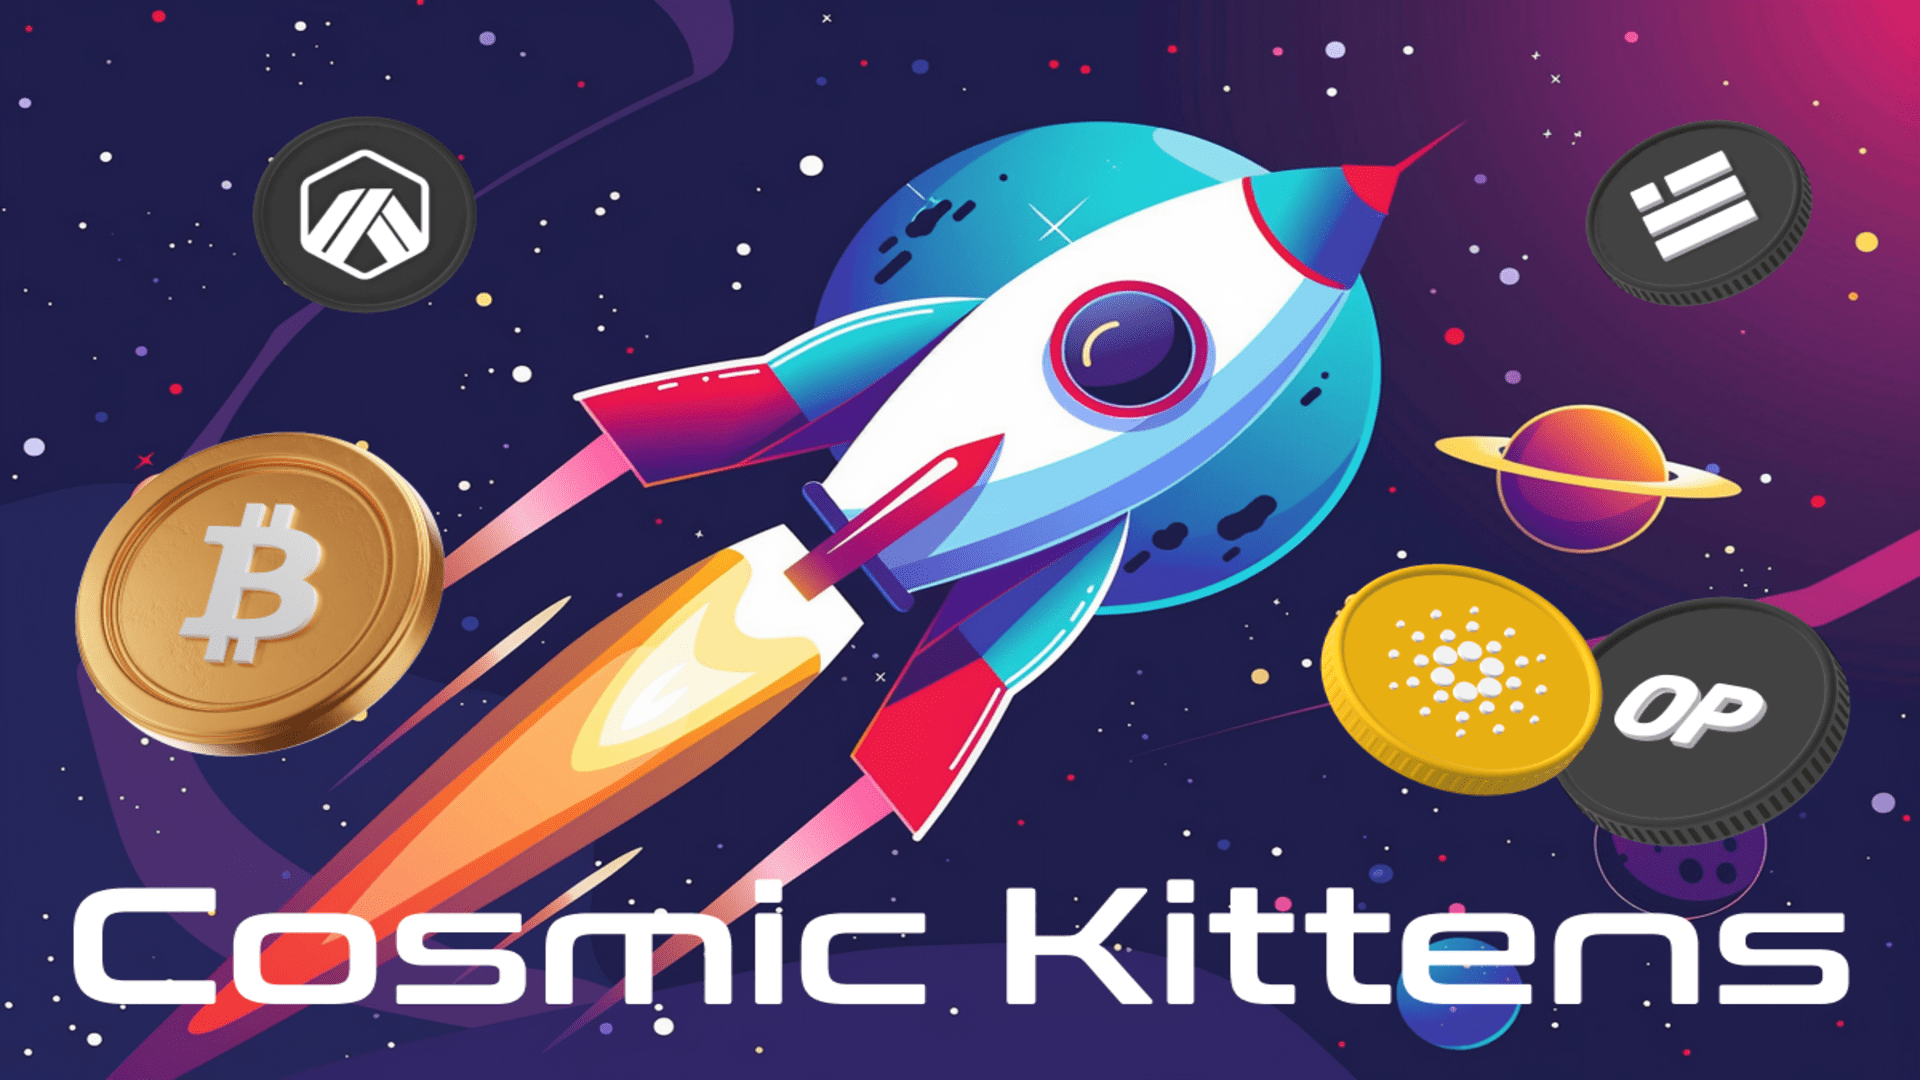 The Cosmic Kittens Presale Attracts DOGE Investors With A 50x Surge Promise